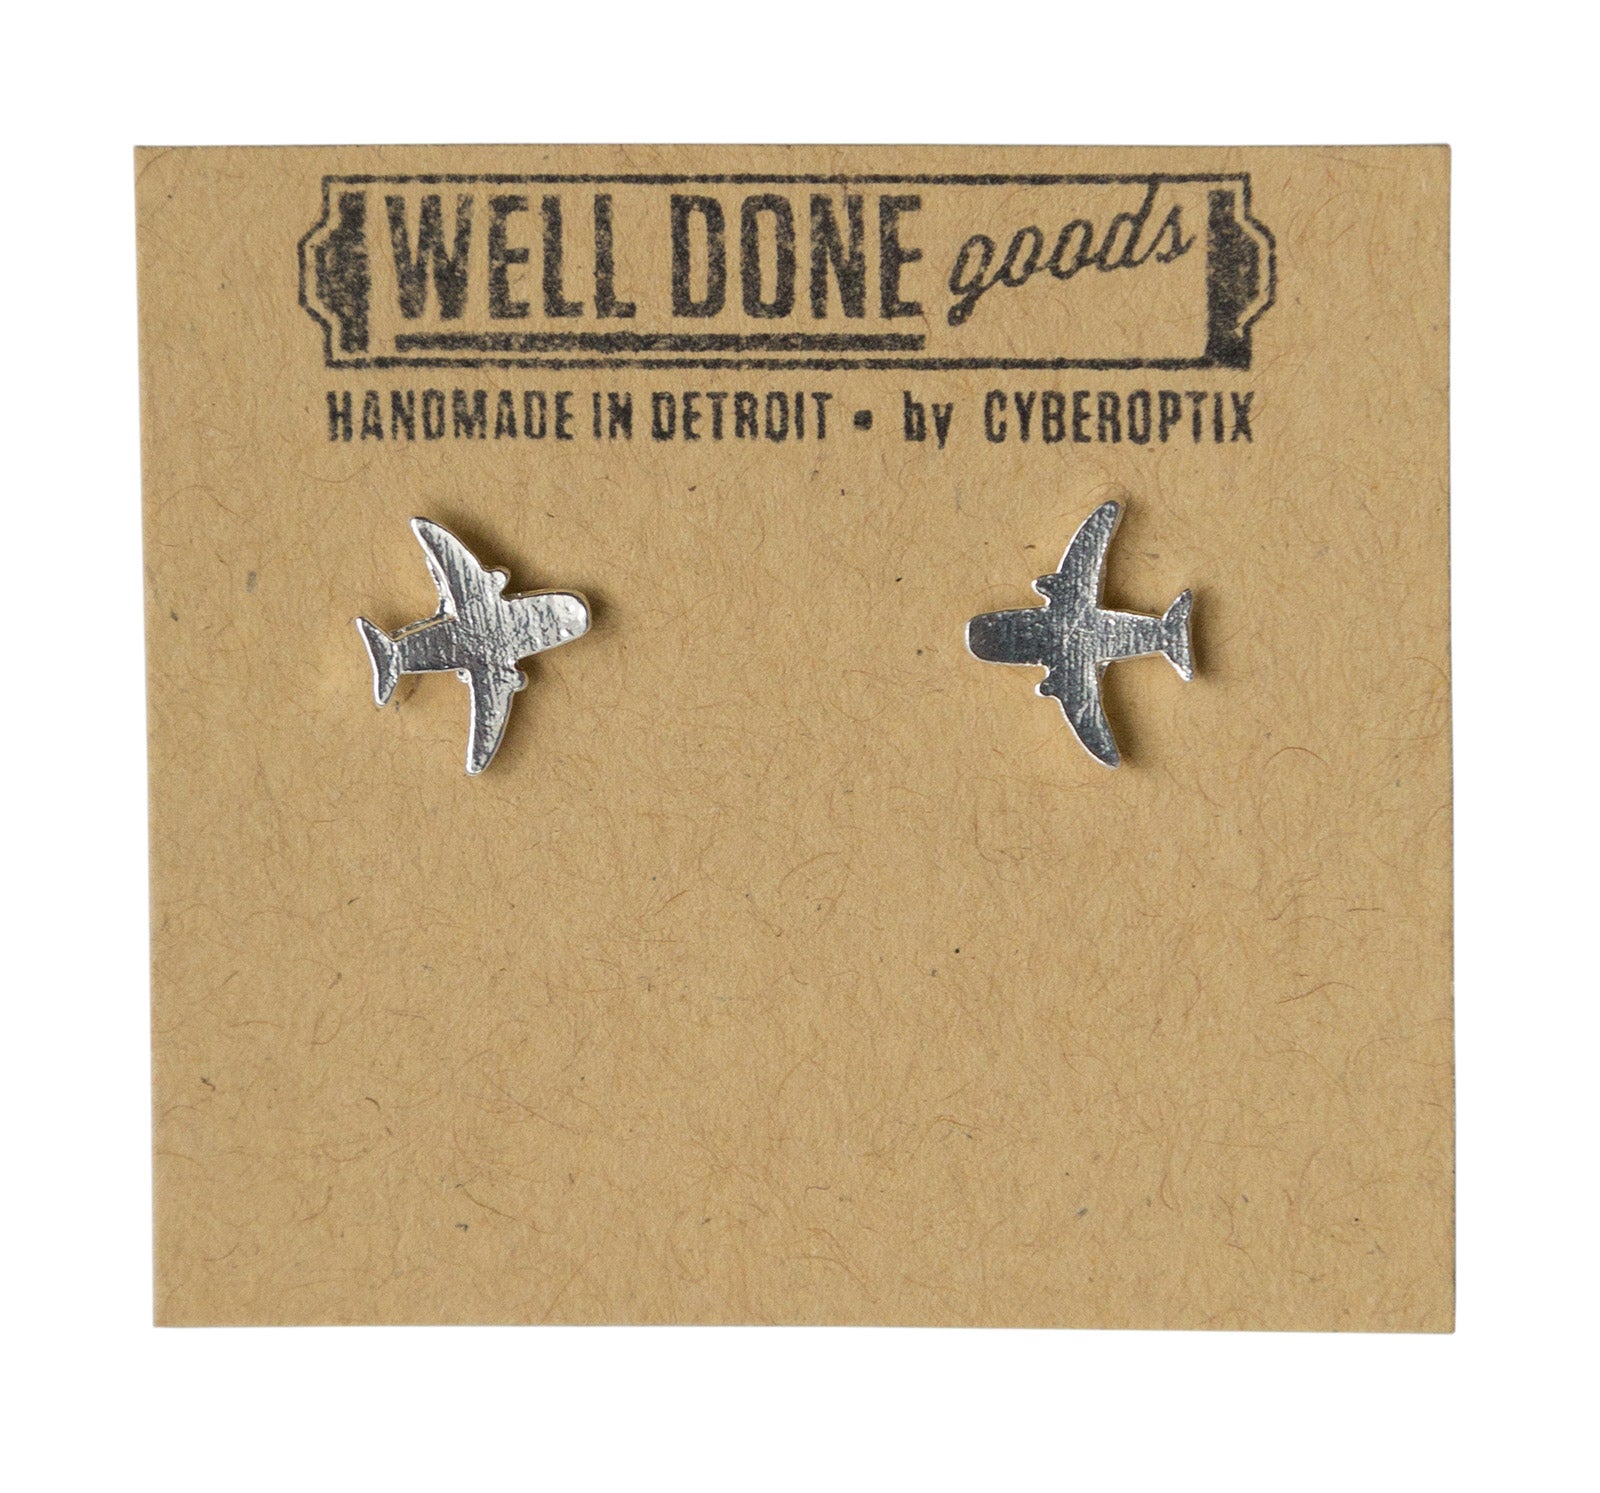 Airplane Stud Earrings, Well Done Goods 